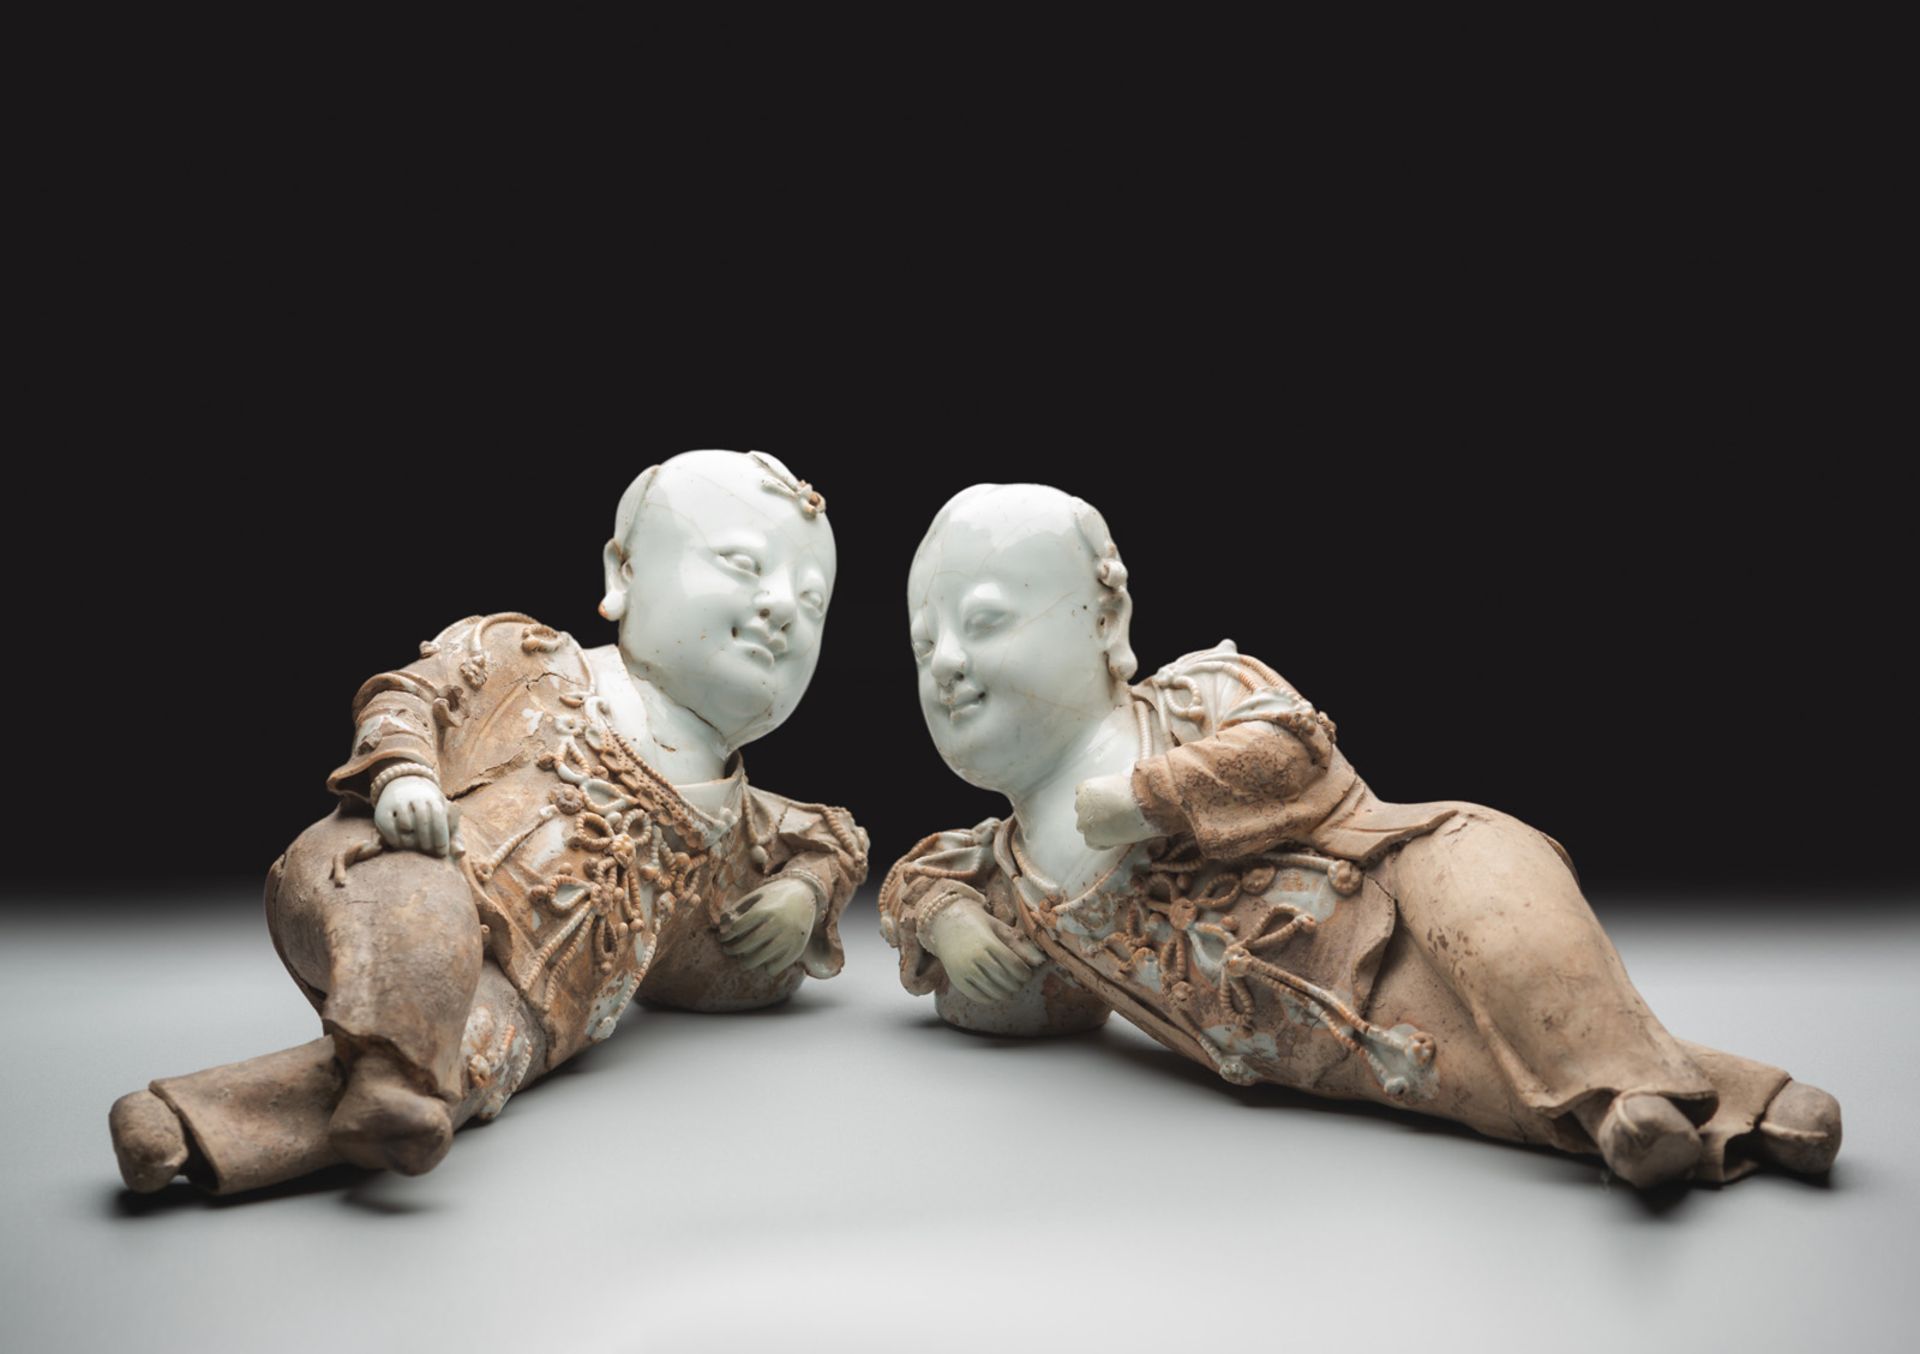 A VERY RARE PAIR OF PART-GLAZED QINGBAI MODELS OF RECLINING BOYS - Image 2 of 6